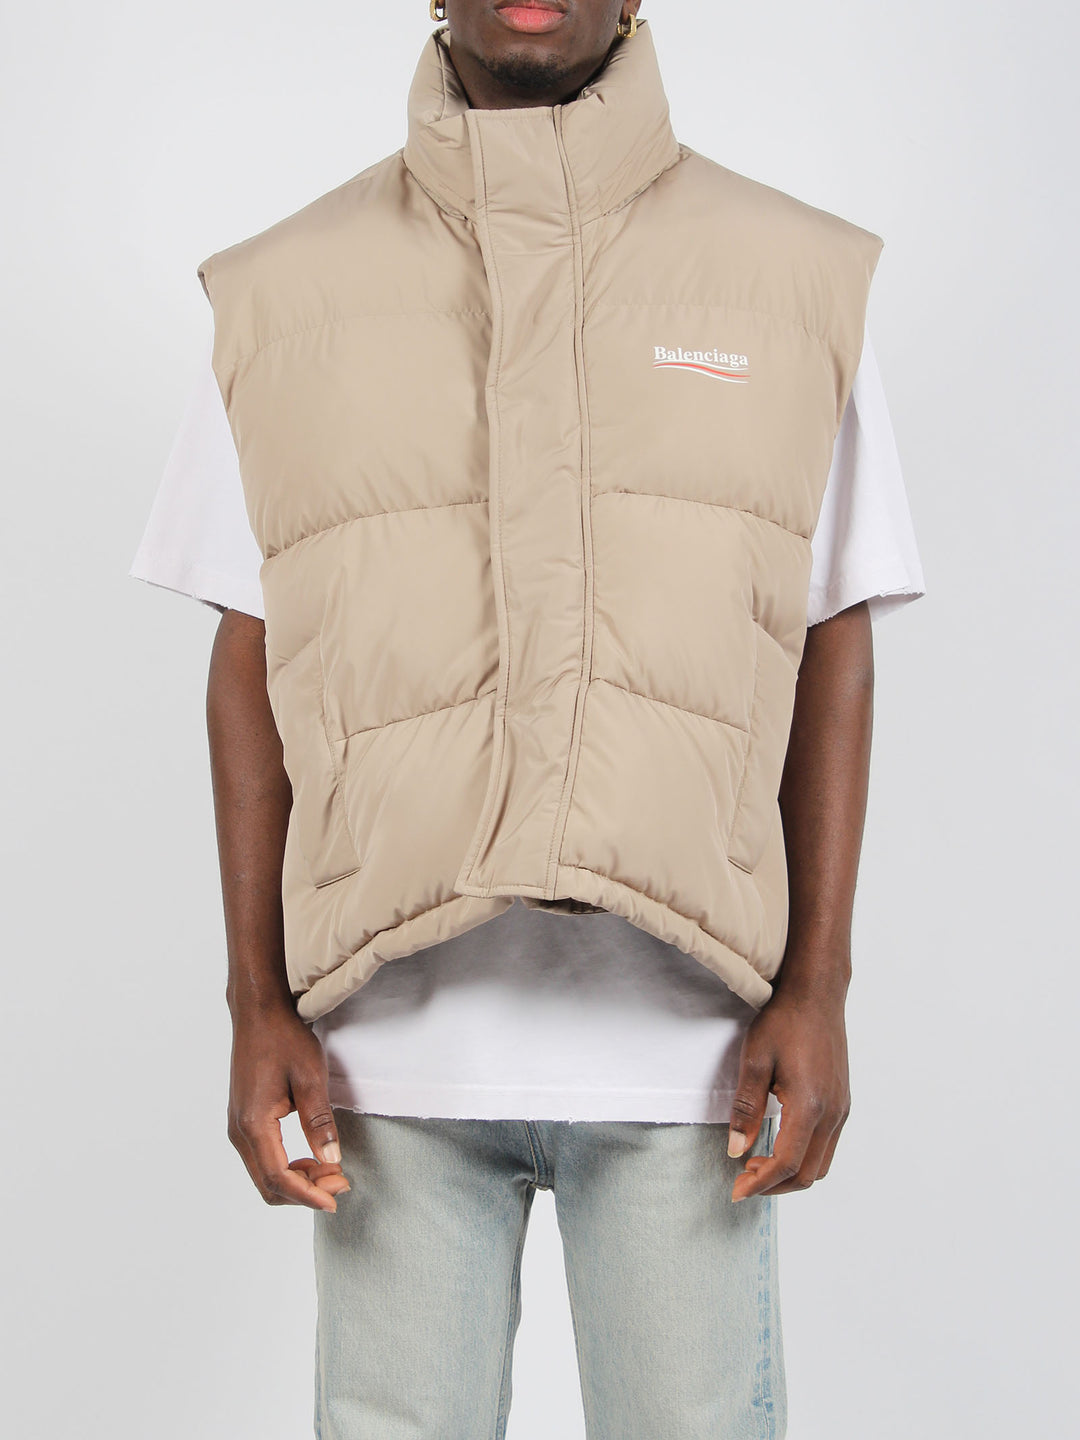 Puffer cocoon political campaign gilet